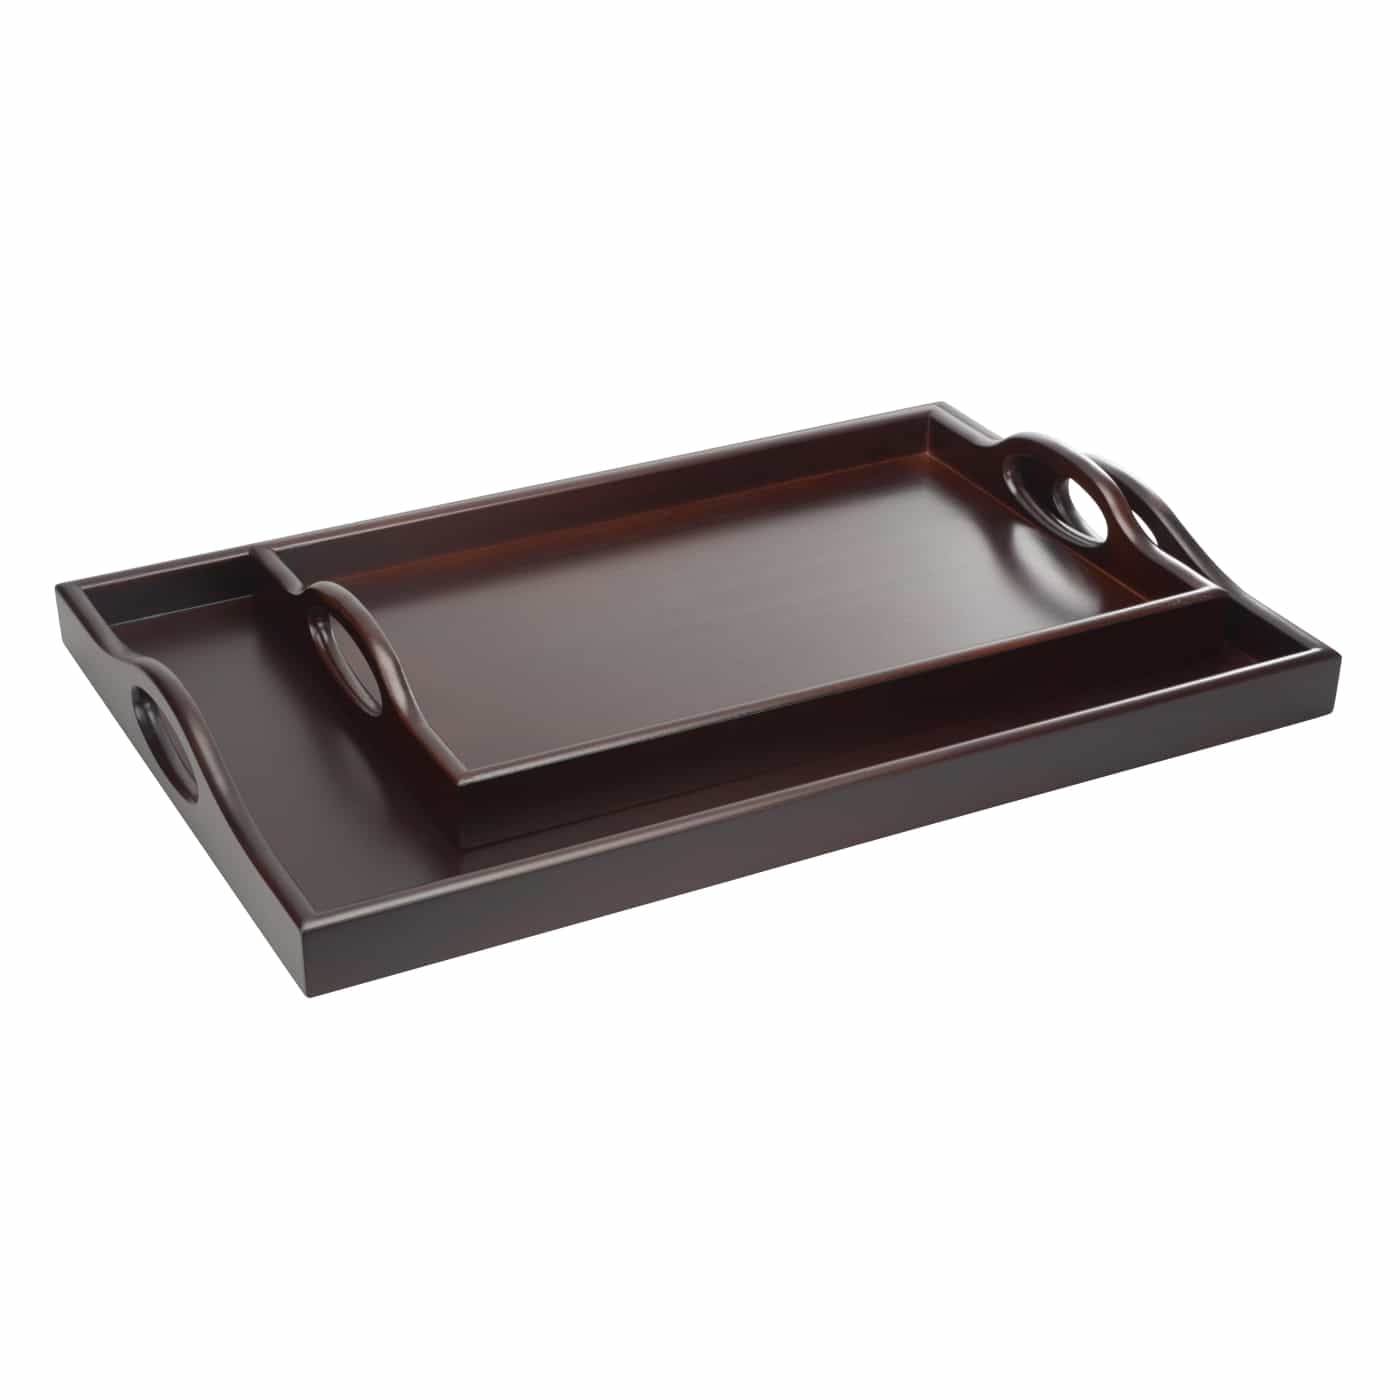 Room service tray | Black or Mahogany | Foremost Products, Glasgow